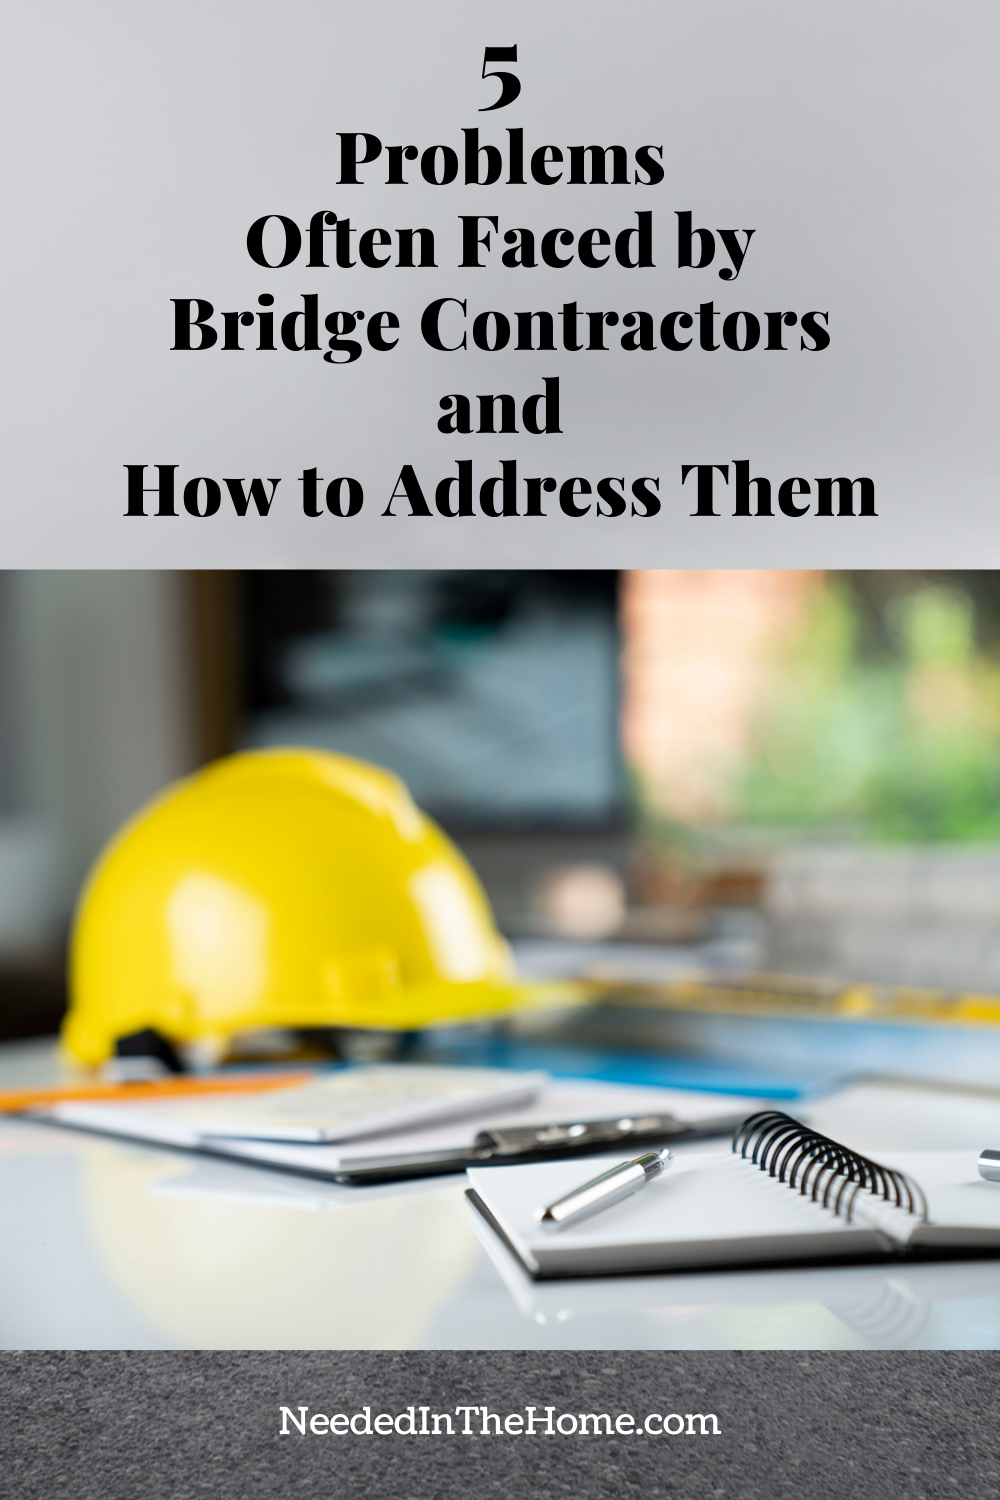 pinterest-pin-description 5 problems often faced by bridge contractors and how to address them hard hat notebook clipboard pen neededinthehome